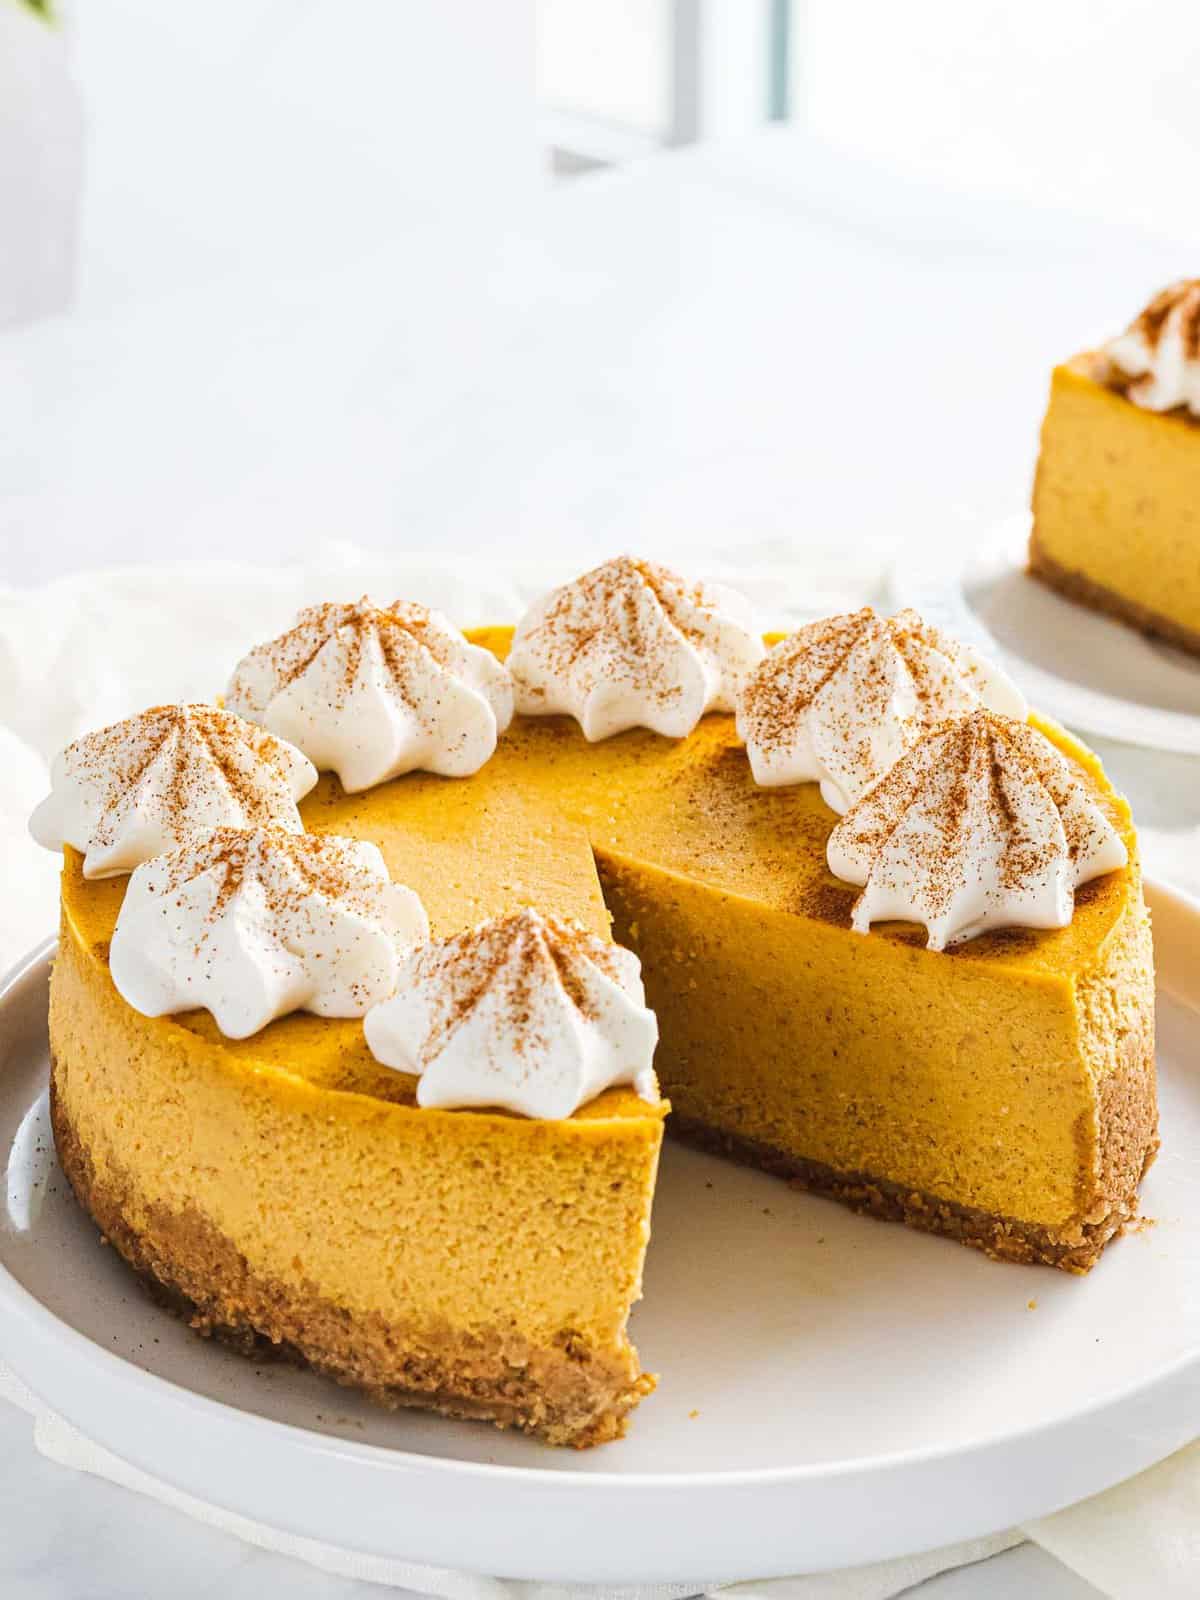 Easy Thanksgiving pumpkin cheesecake with whipped cream.